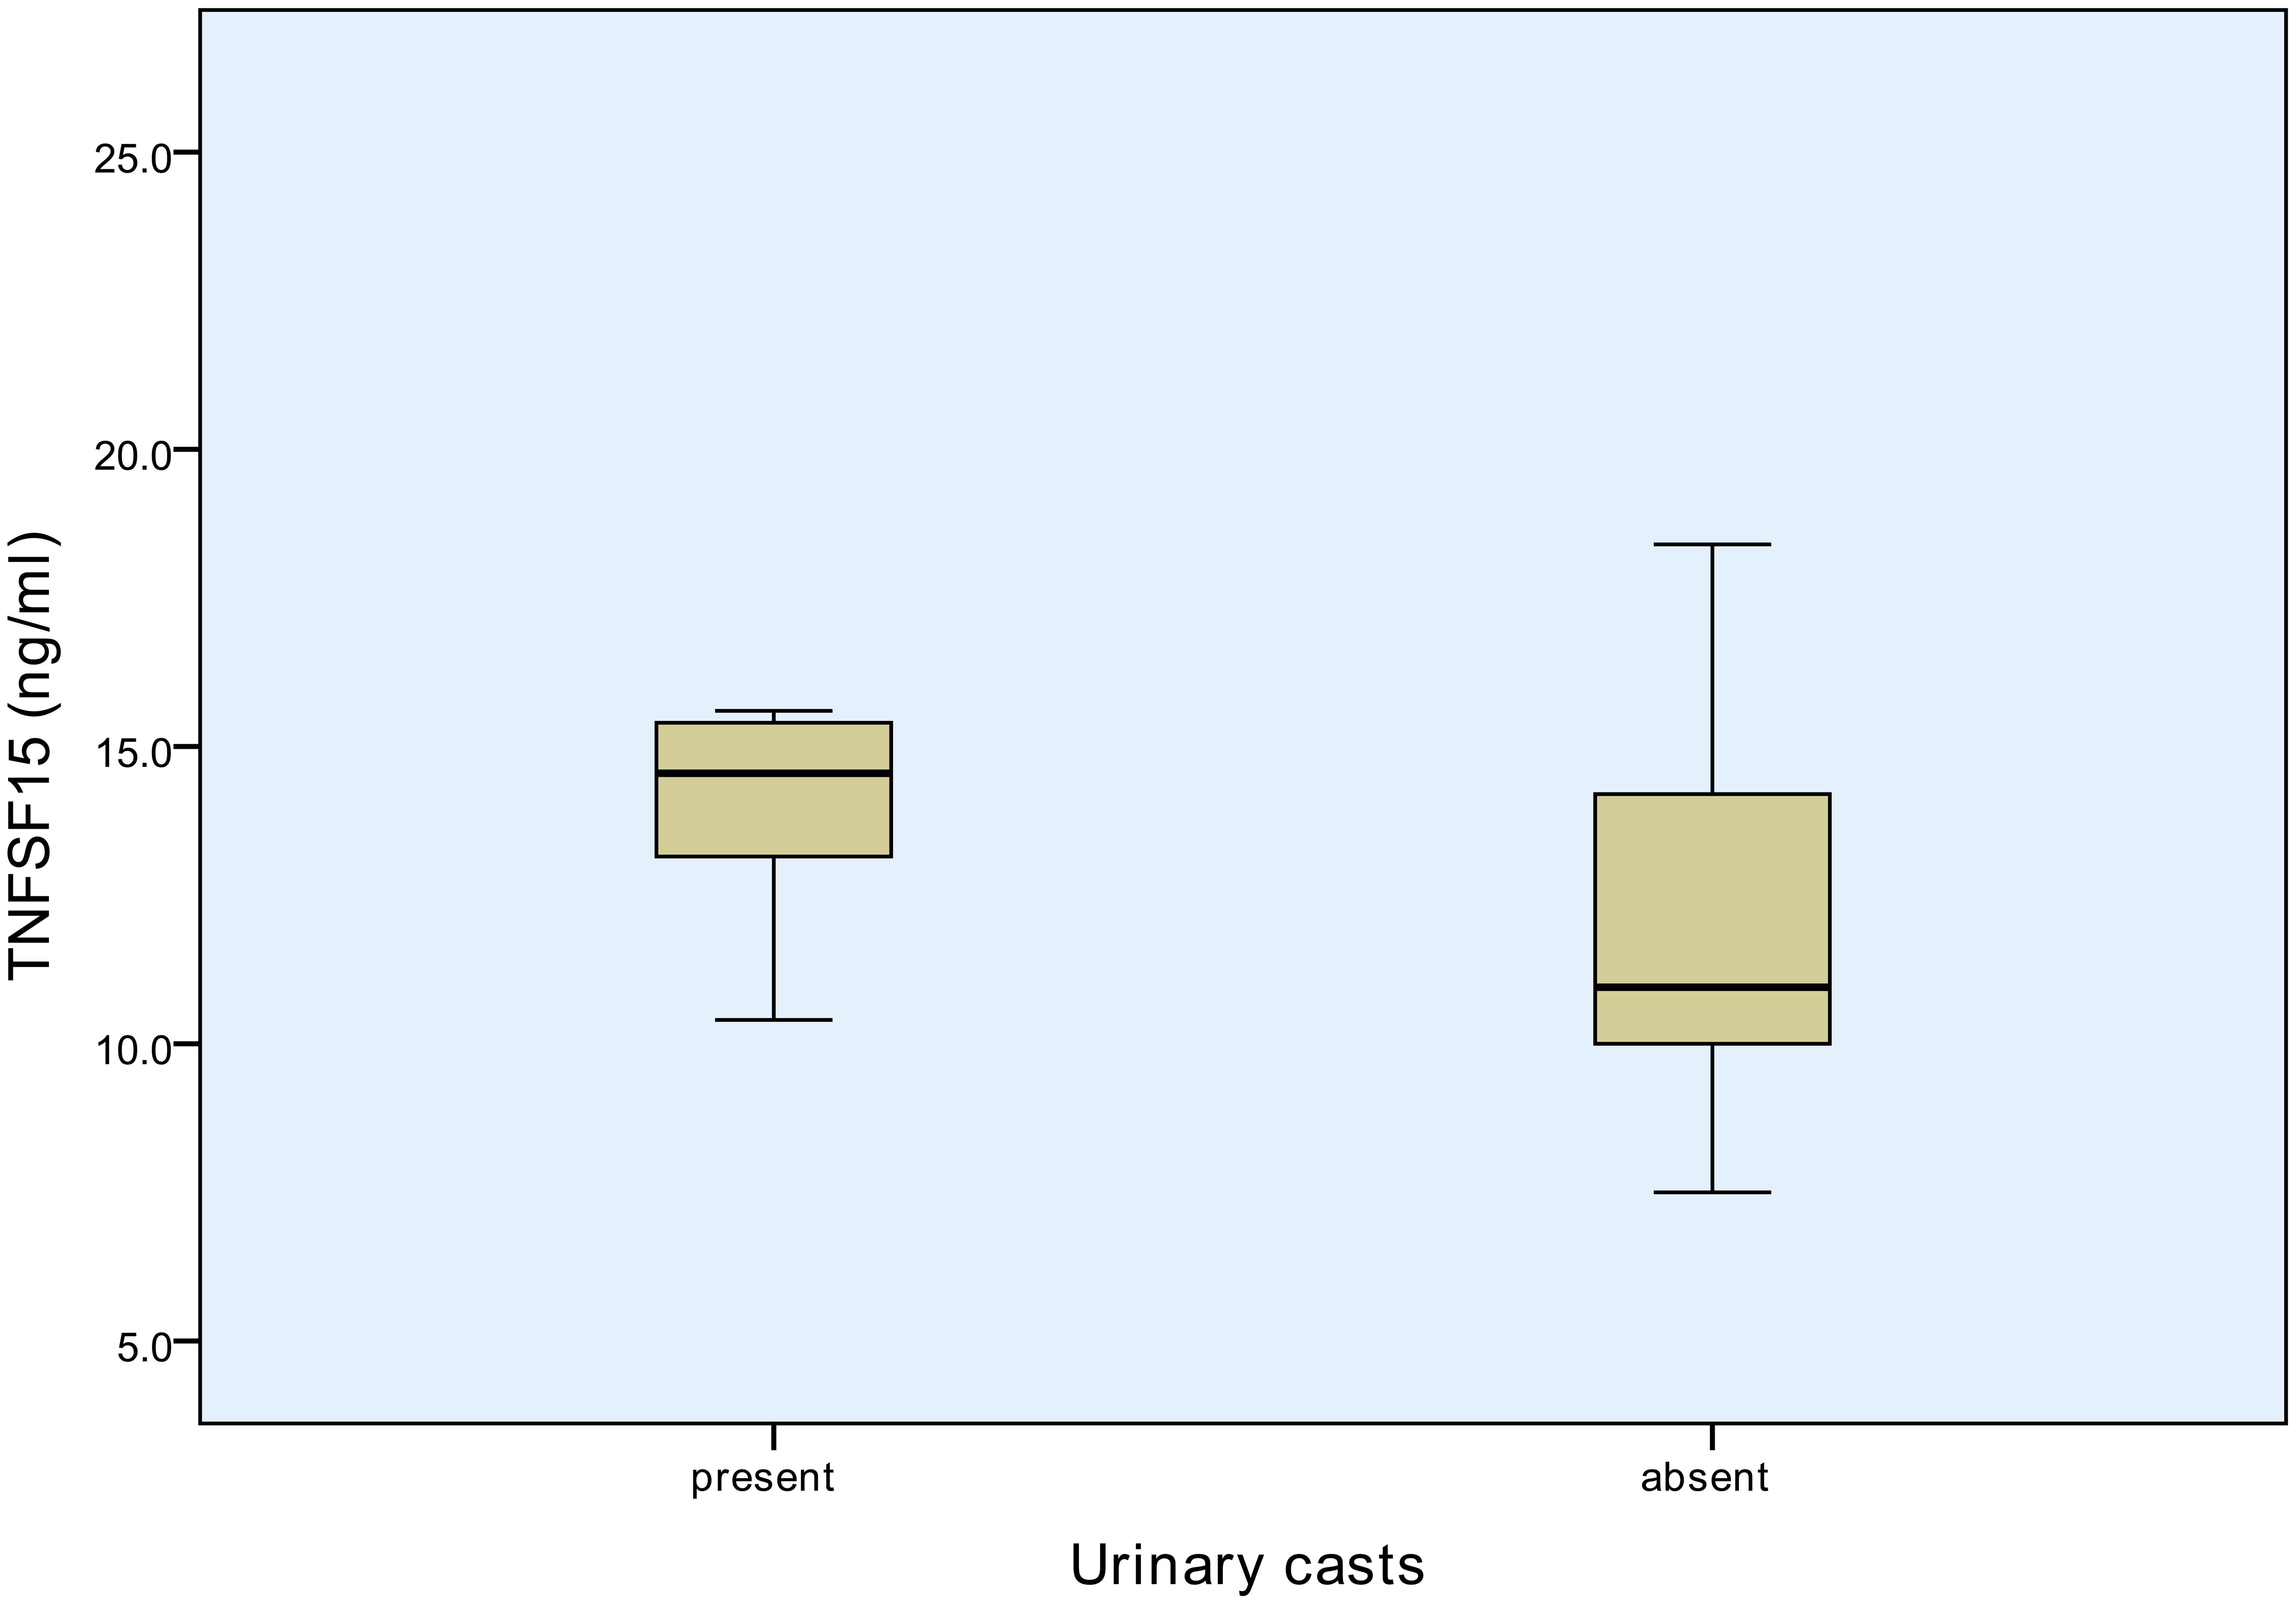 Median TNFSF15 concentration in SLE patients with and without casts in urine.